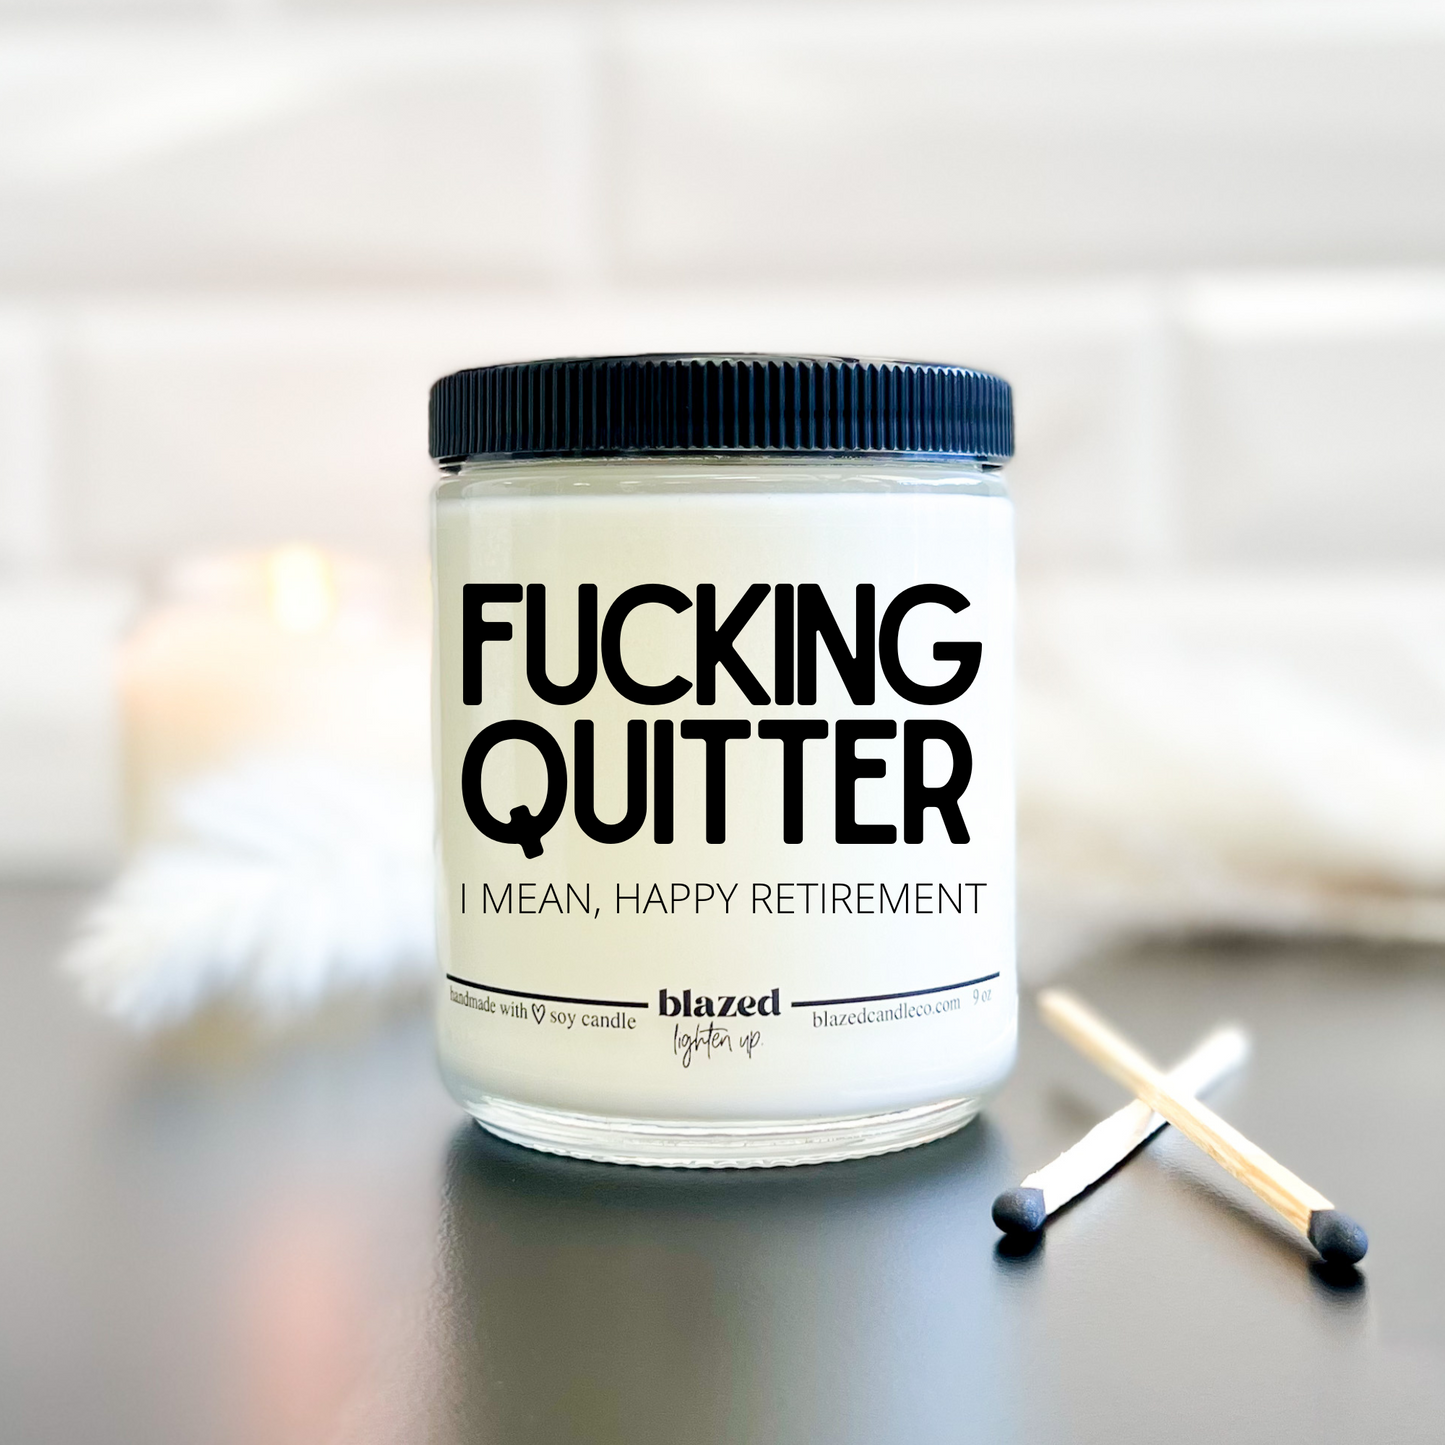 Fucking Quitter - Retirement Candle